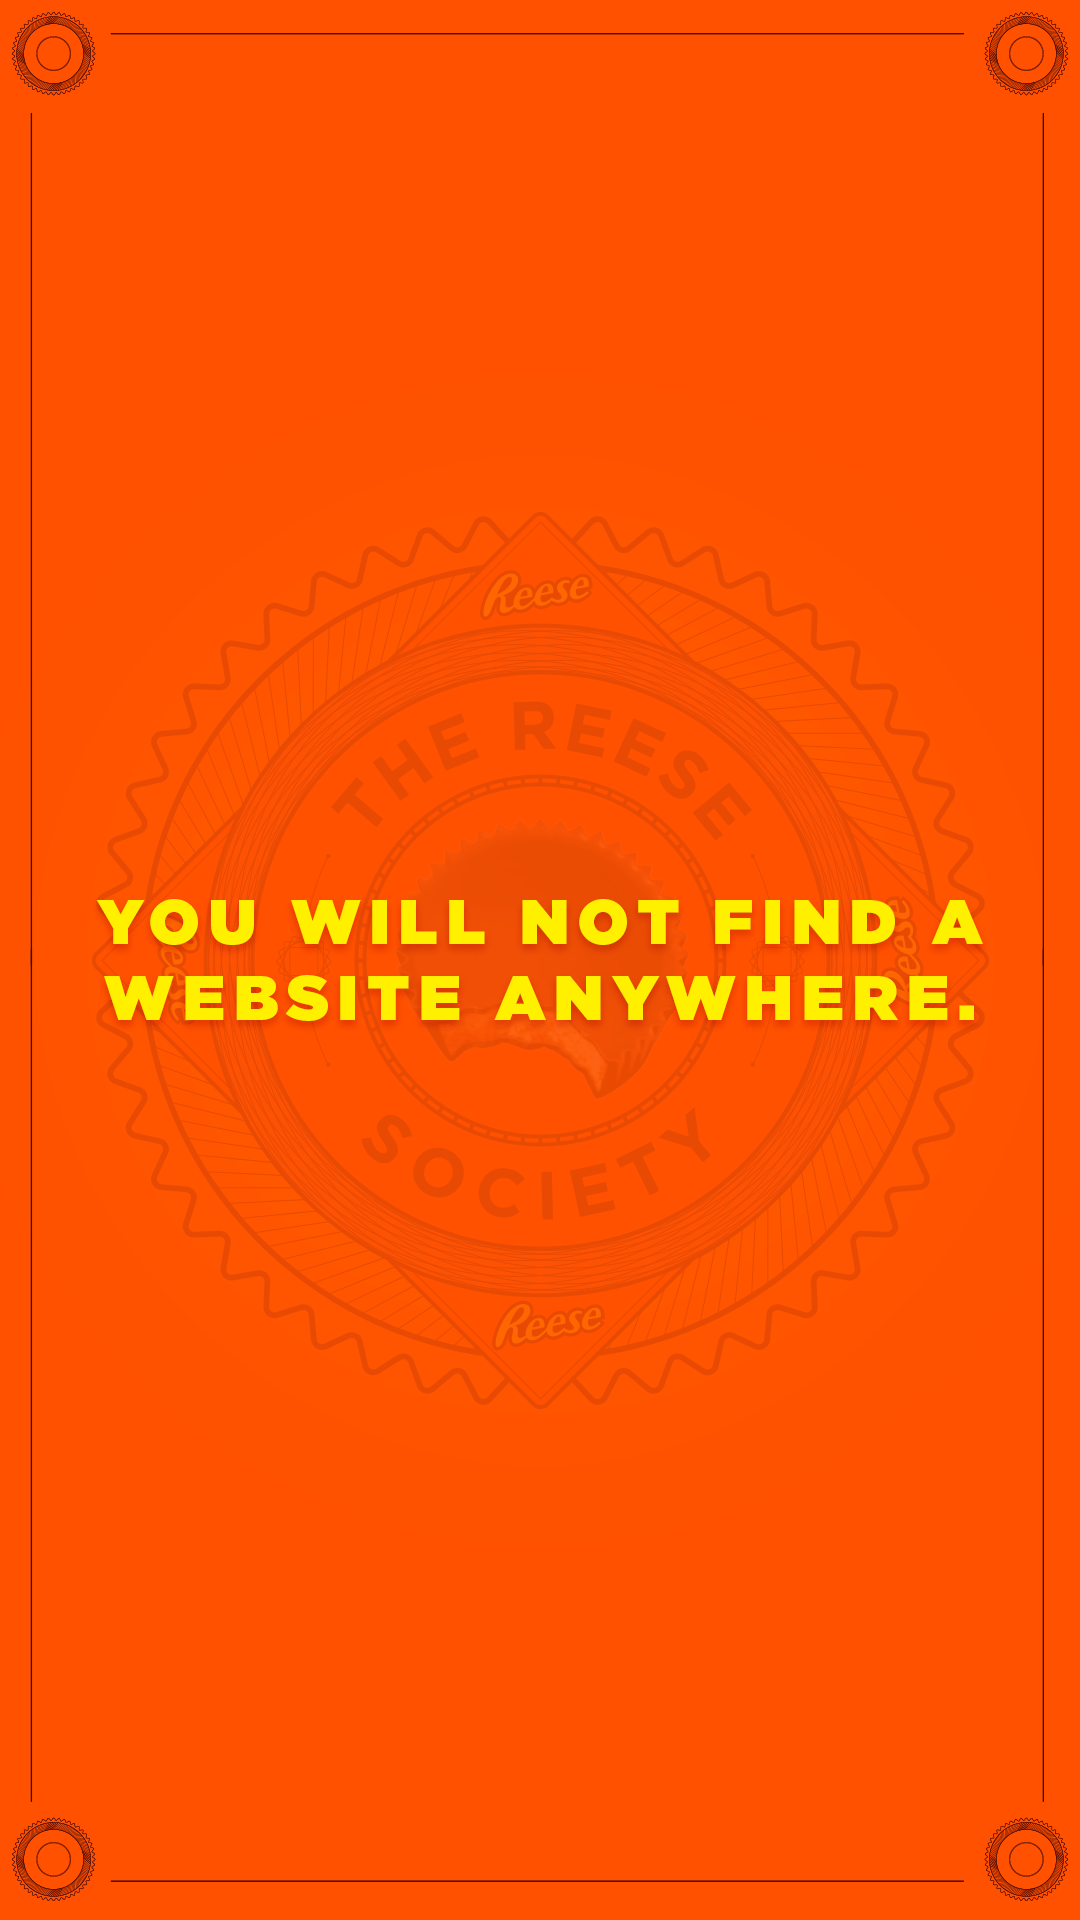 Reese-Society-IG_0050_You-will-not-find-a-website-anywhere.png